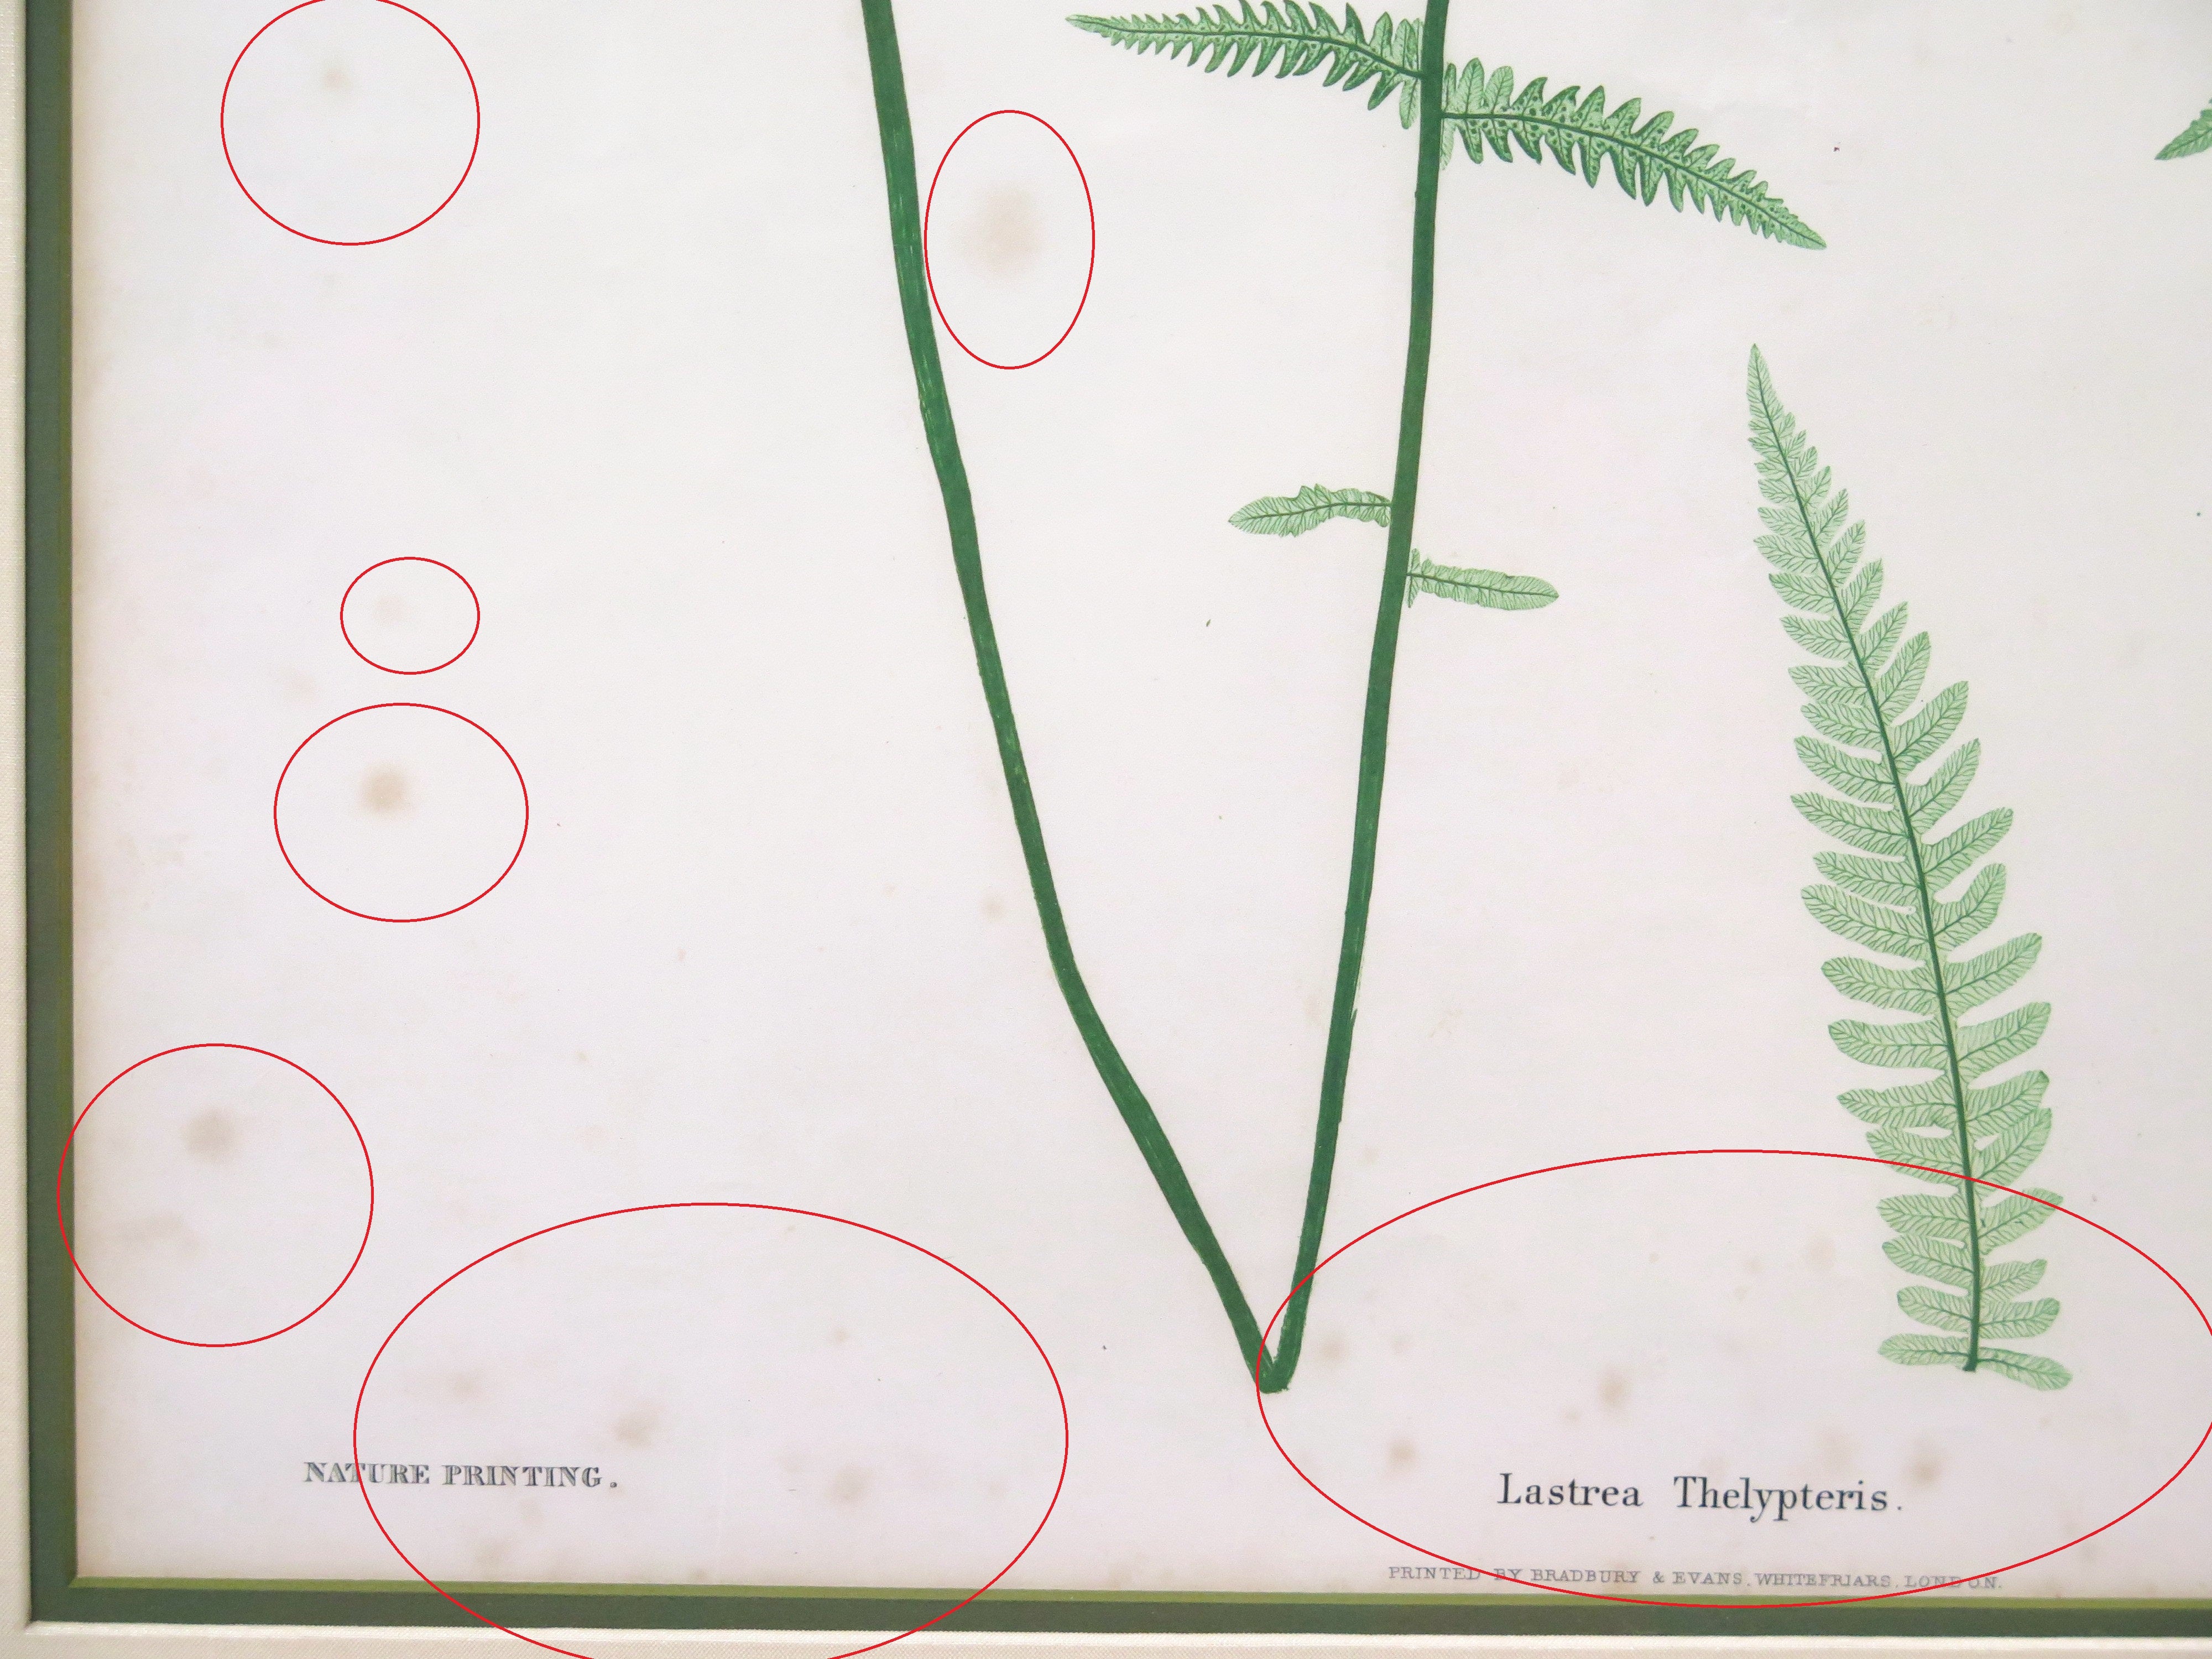 Thomas Moore (British, 1821-1887), Two Nature-printed Plates of Ferns